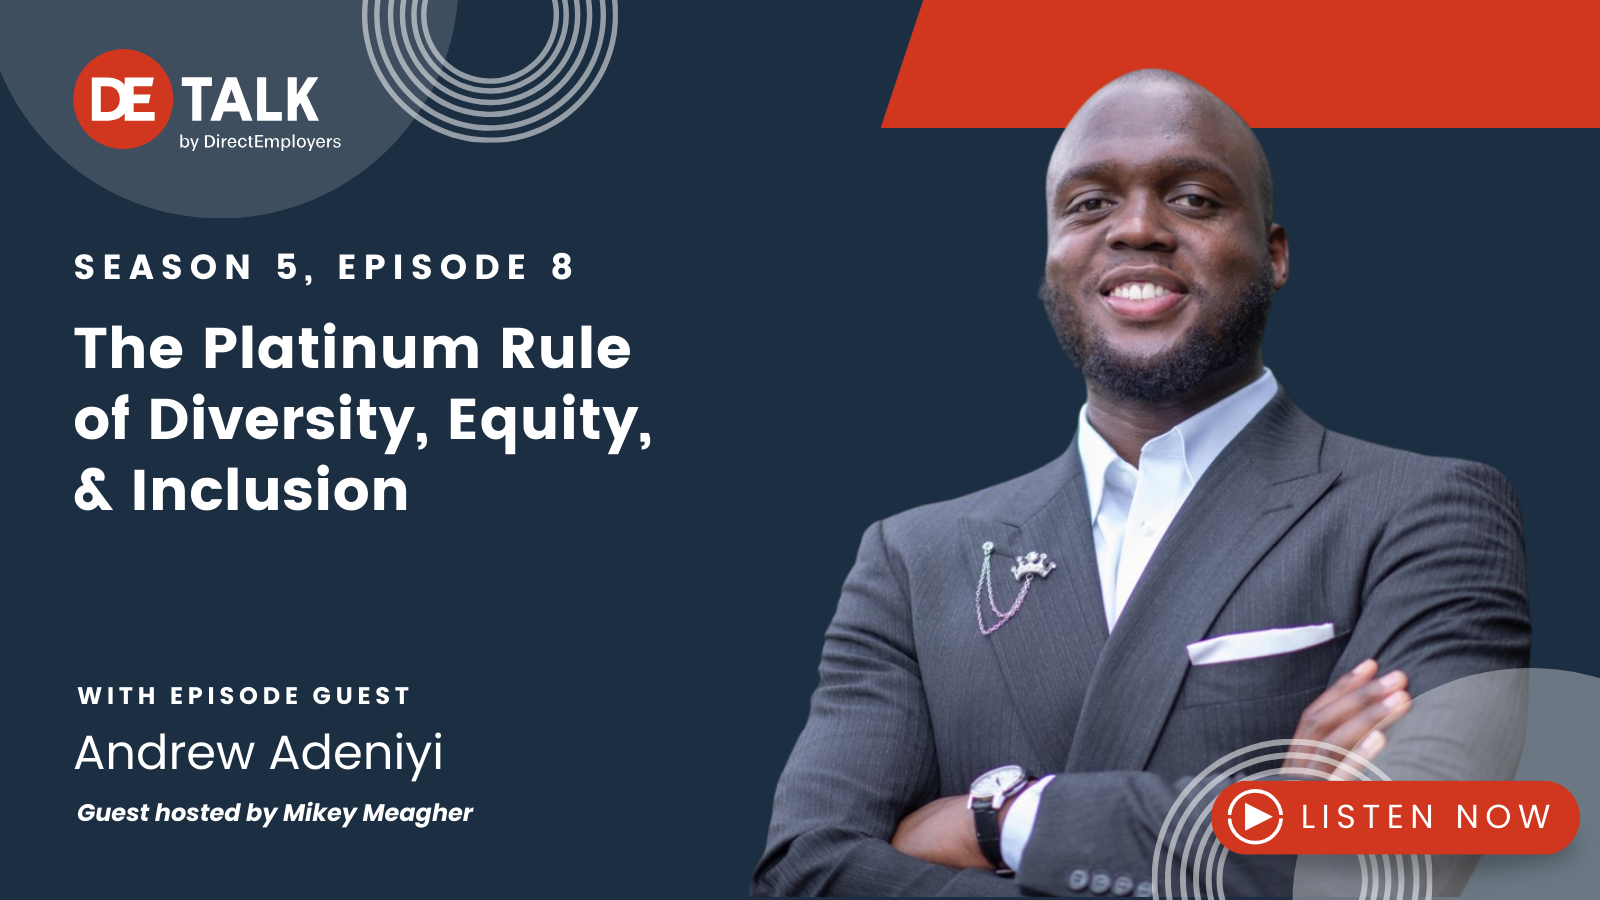 DE Talk S5E8 The Platinum Rule of Diversity, Equity, & Inclusion with Andrew Adeniyi